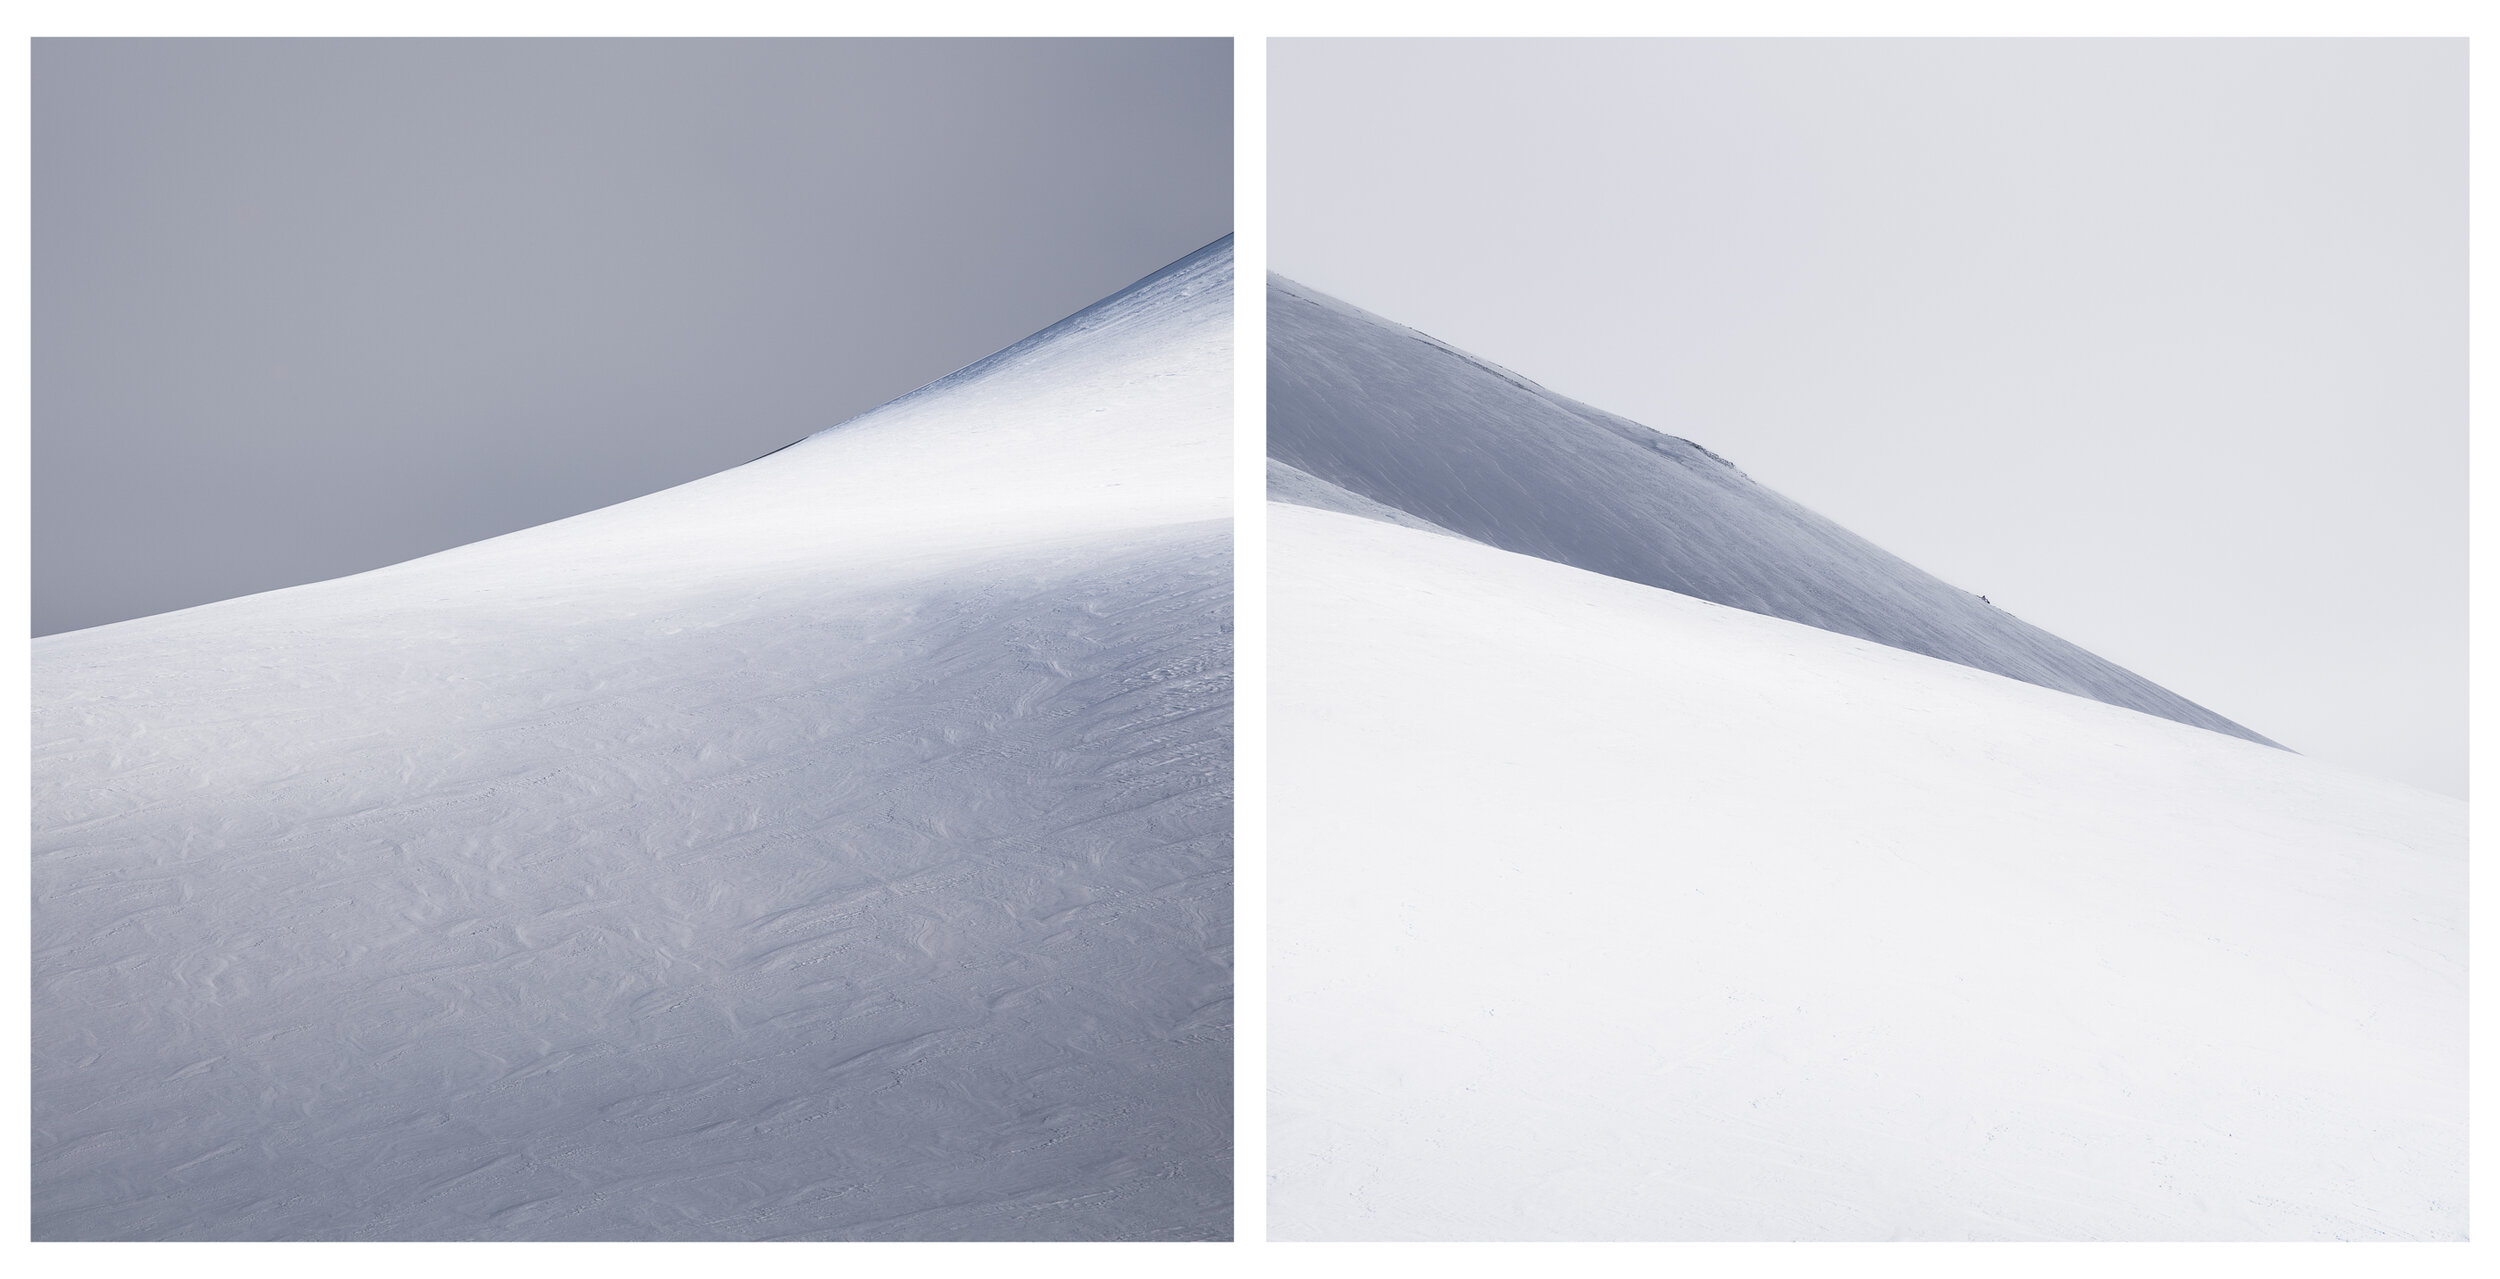  Snow creates a neutral palette curving over the landscape of the interior of Iceland in the winter. Light breaks through the clouds, placing a spotlight on a slope, a hollow, a valley. The snow not caught in its beam recedes into shadow.  With a cha